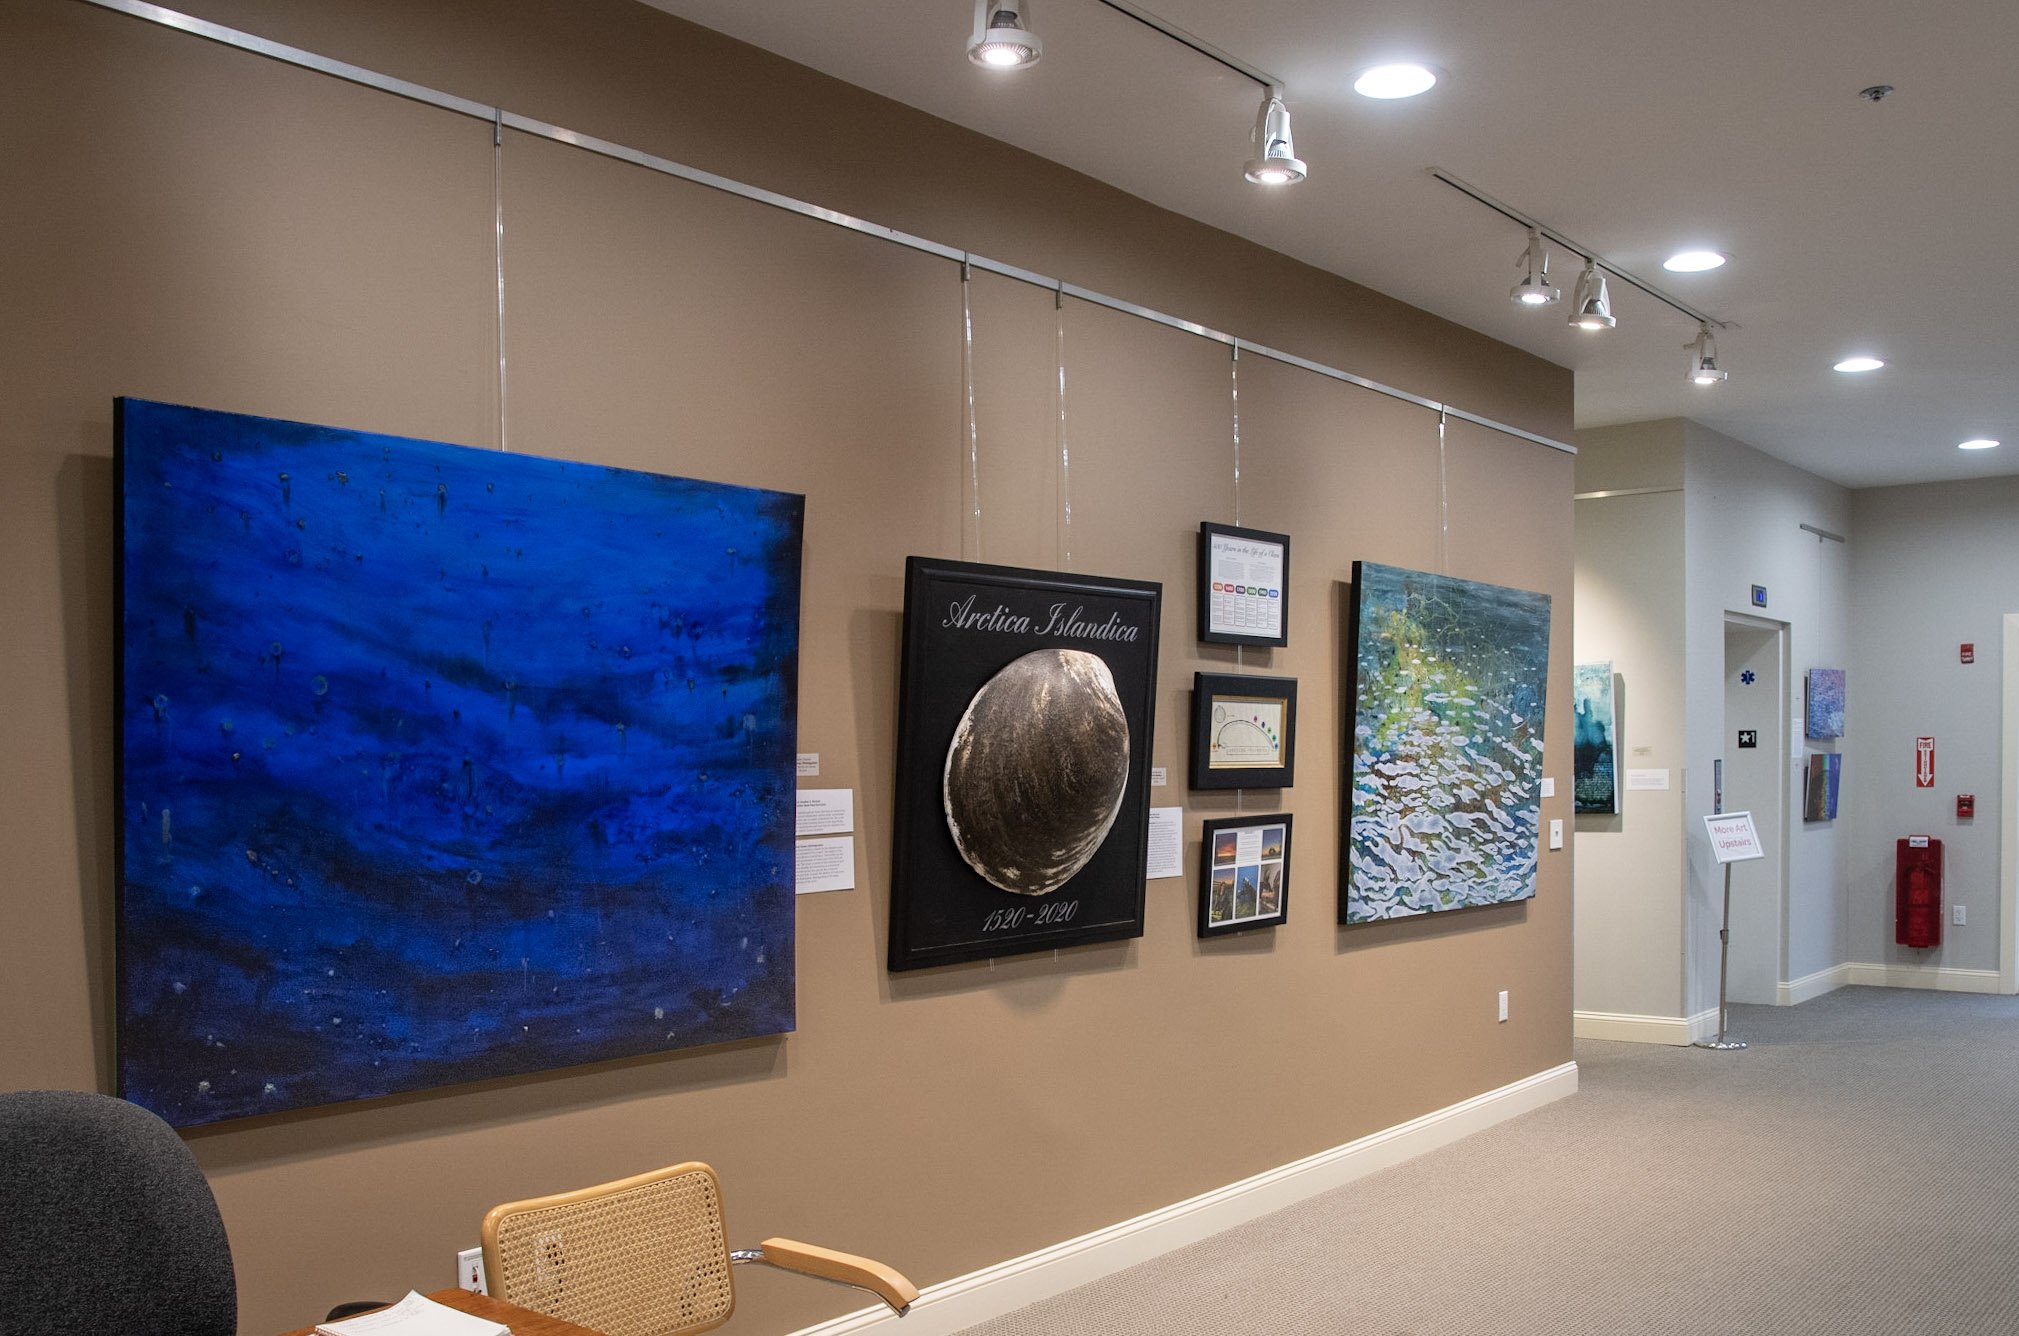  Several pieces of artwork in the gallery, including "Deep Ocean: Disintegration" by Heather E. Stivison, "Arctica Islandica" by Claire Marschak, and "Coastal Surface: Community" by Heather E. Stivison 